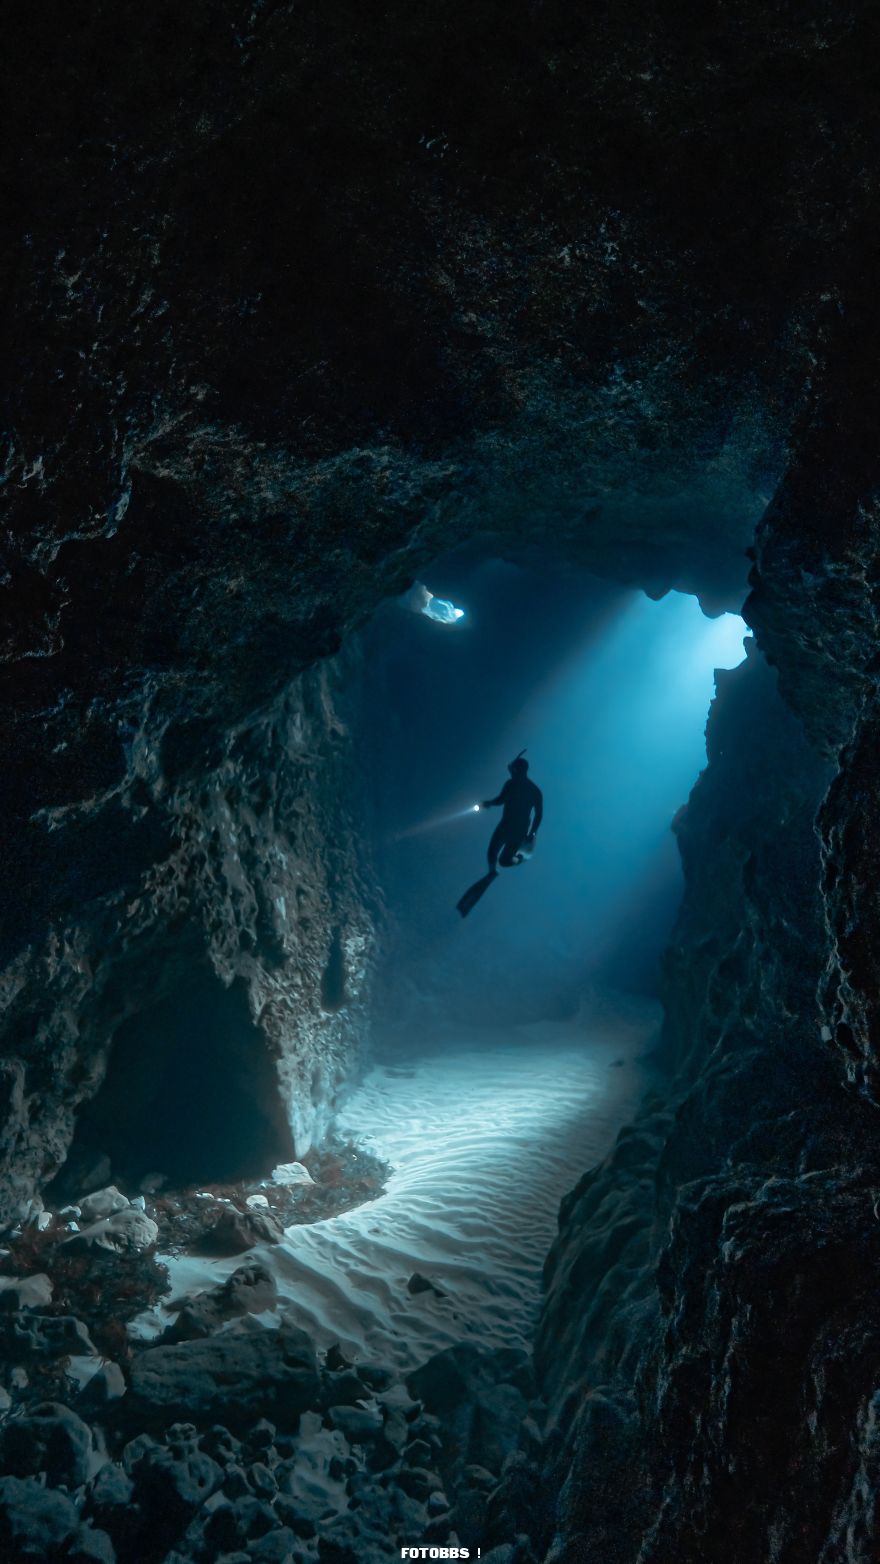 Freediving-underwater-caves-by-victordevalles-Spain-5e58e3007147a__880.jpg